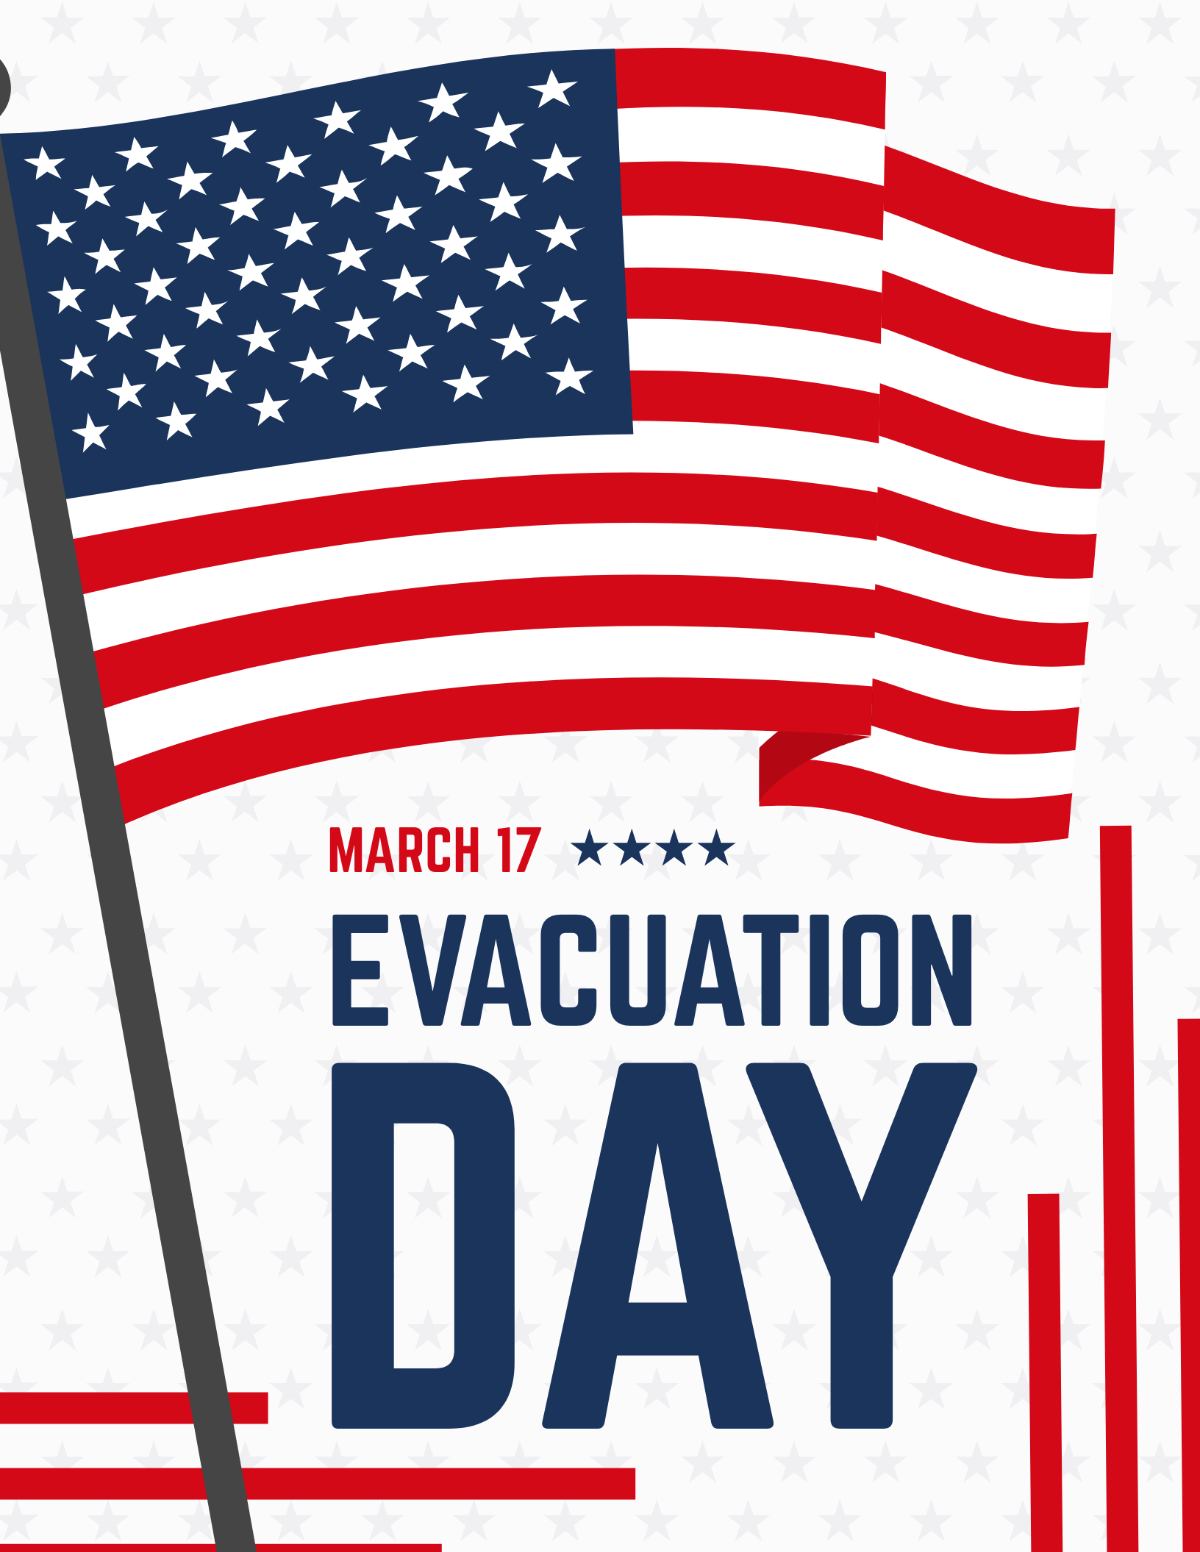 Evacuation Day Flyer Template